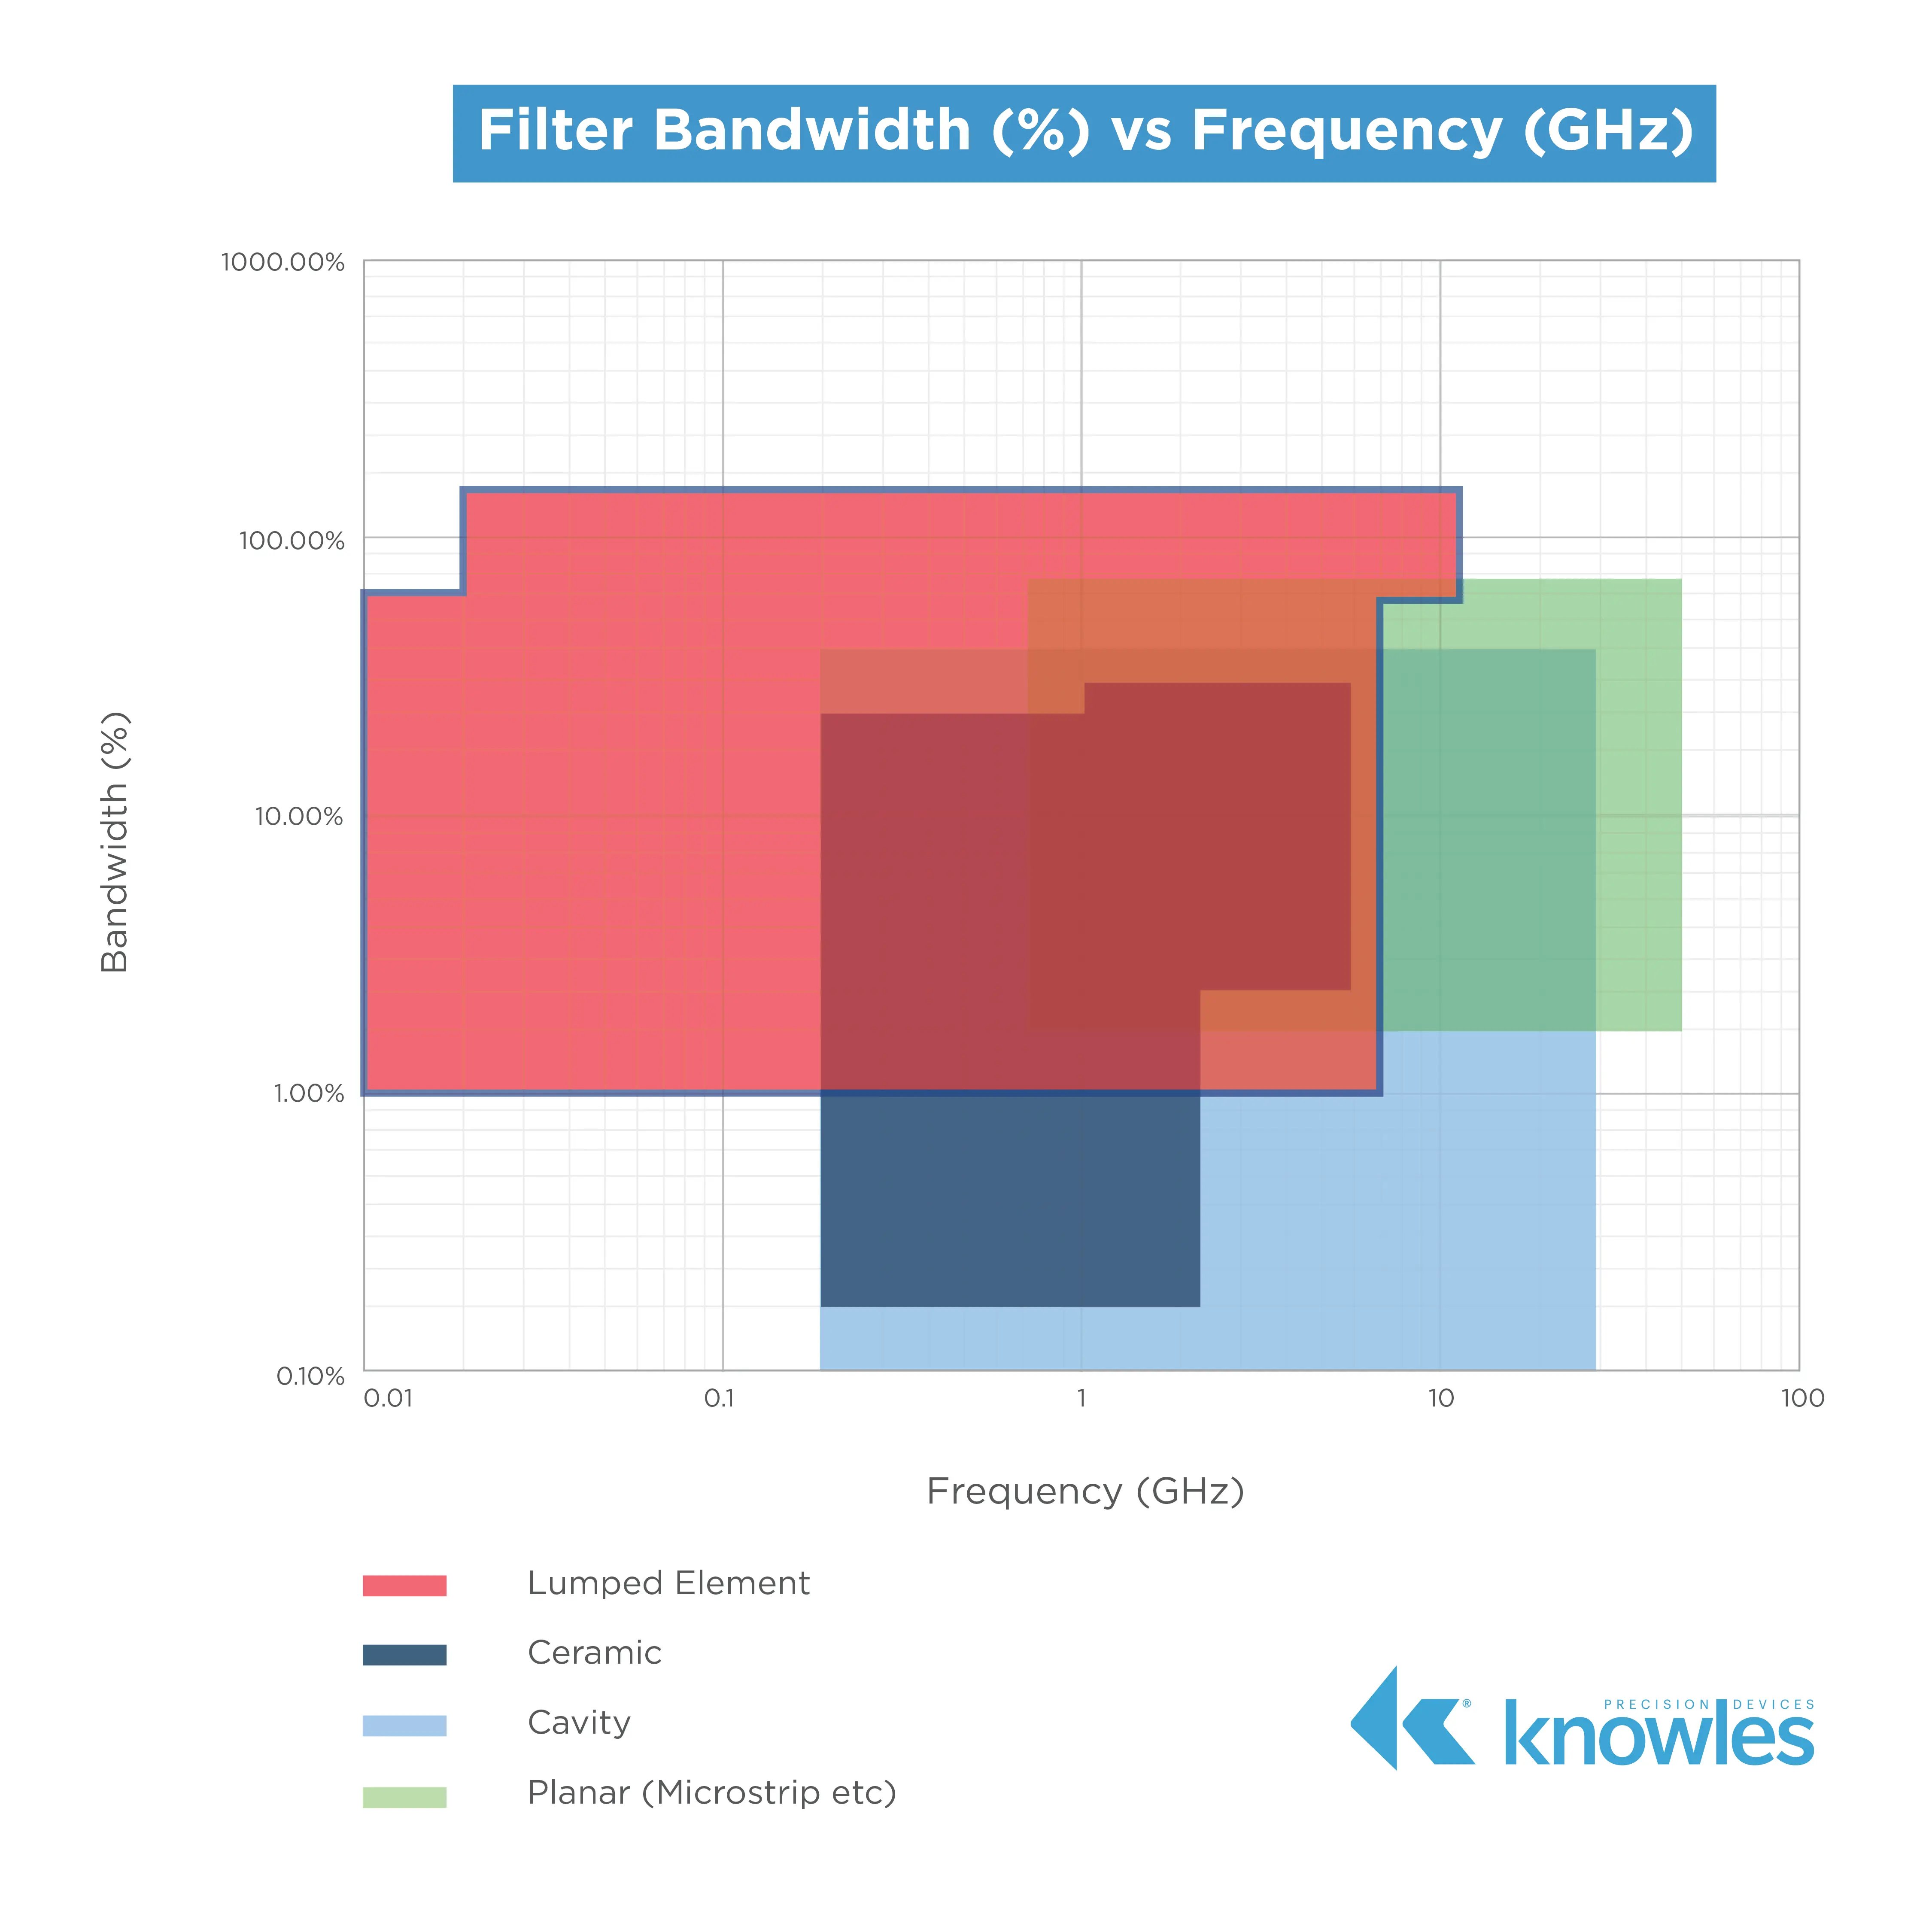 Filter Bandwidth vs Frequency_Lumped Element